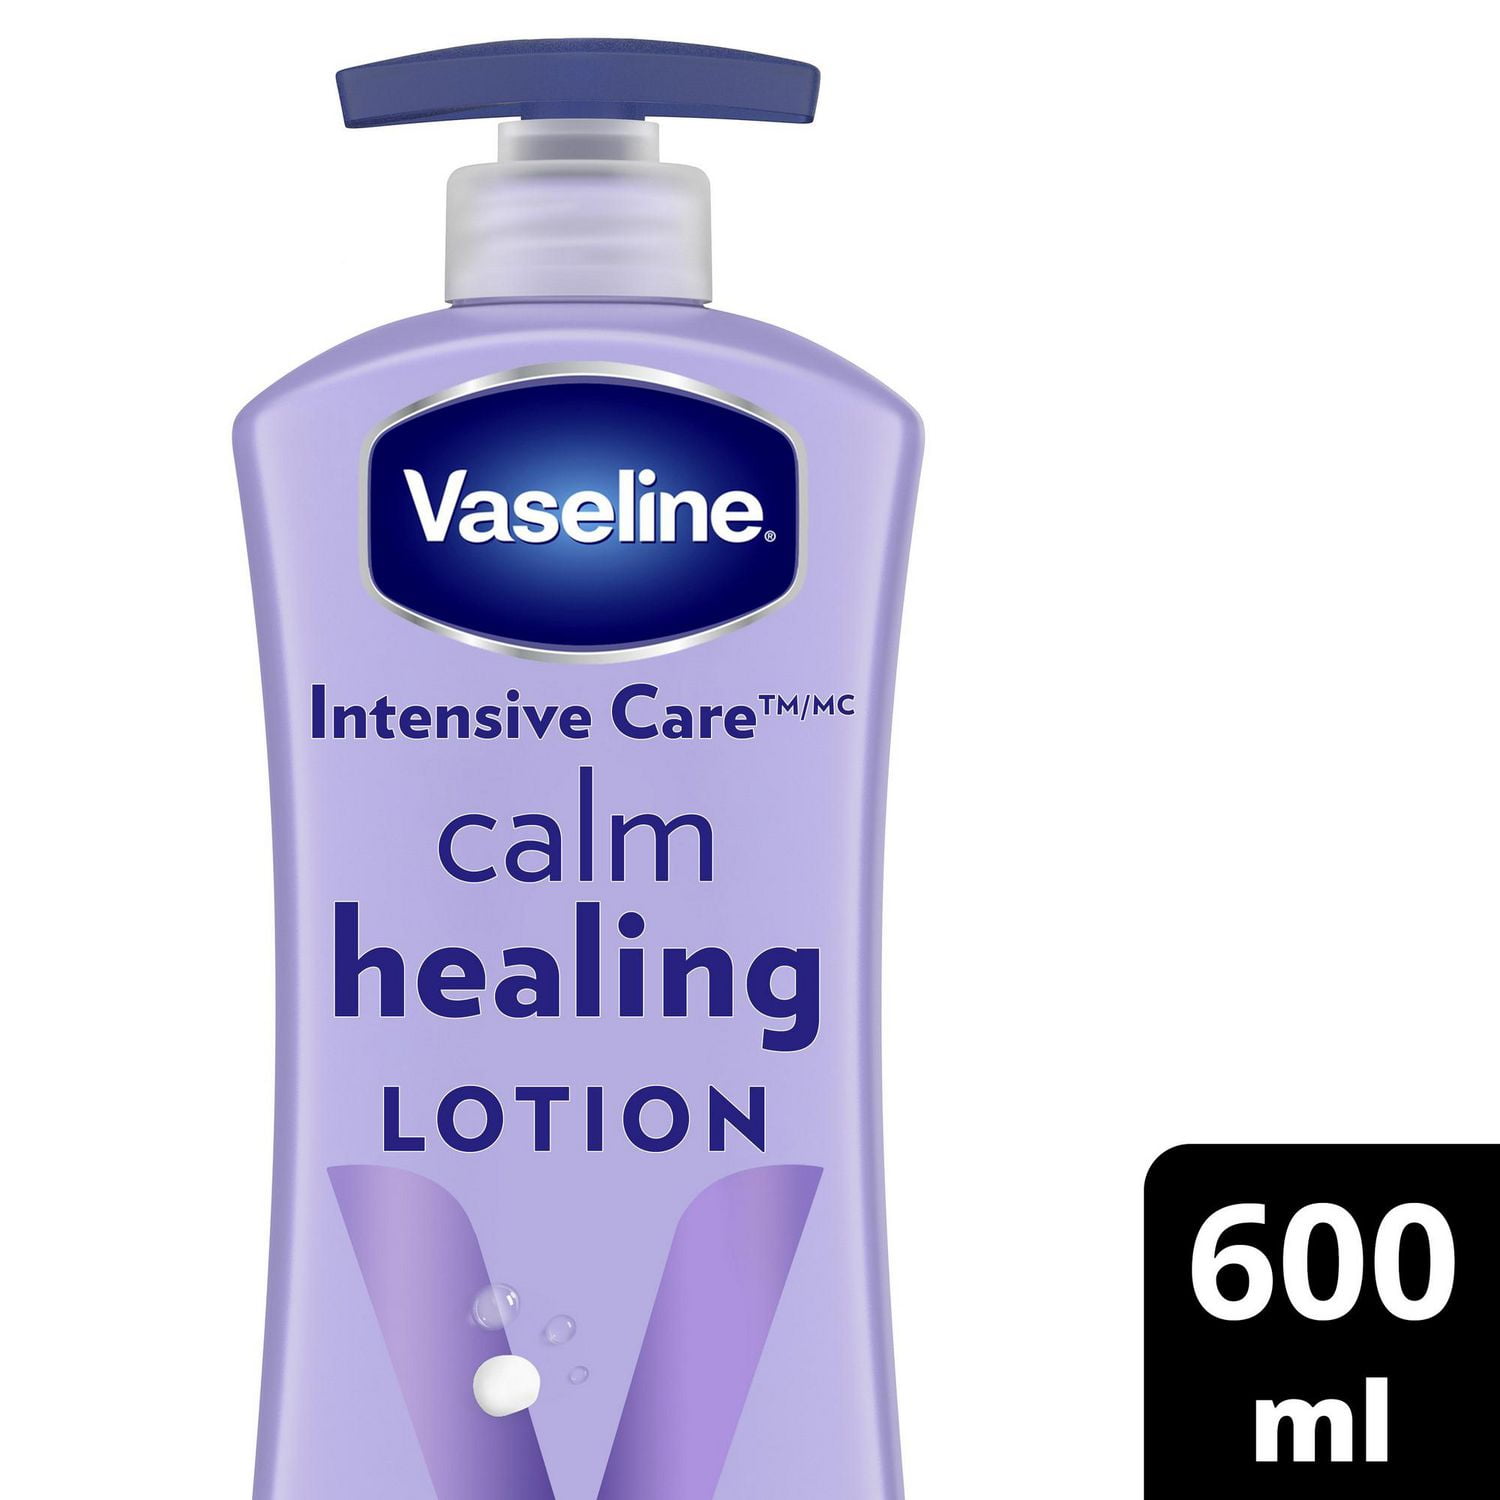 25 Things You Never Knew Vaseline Could Do